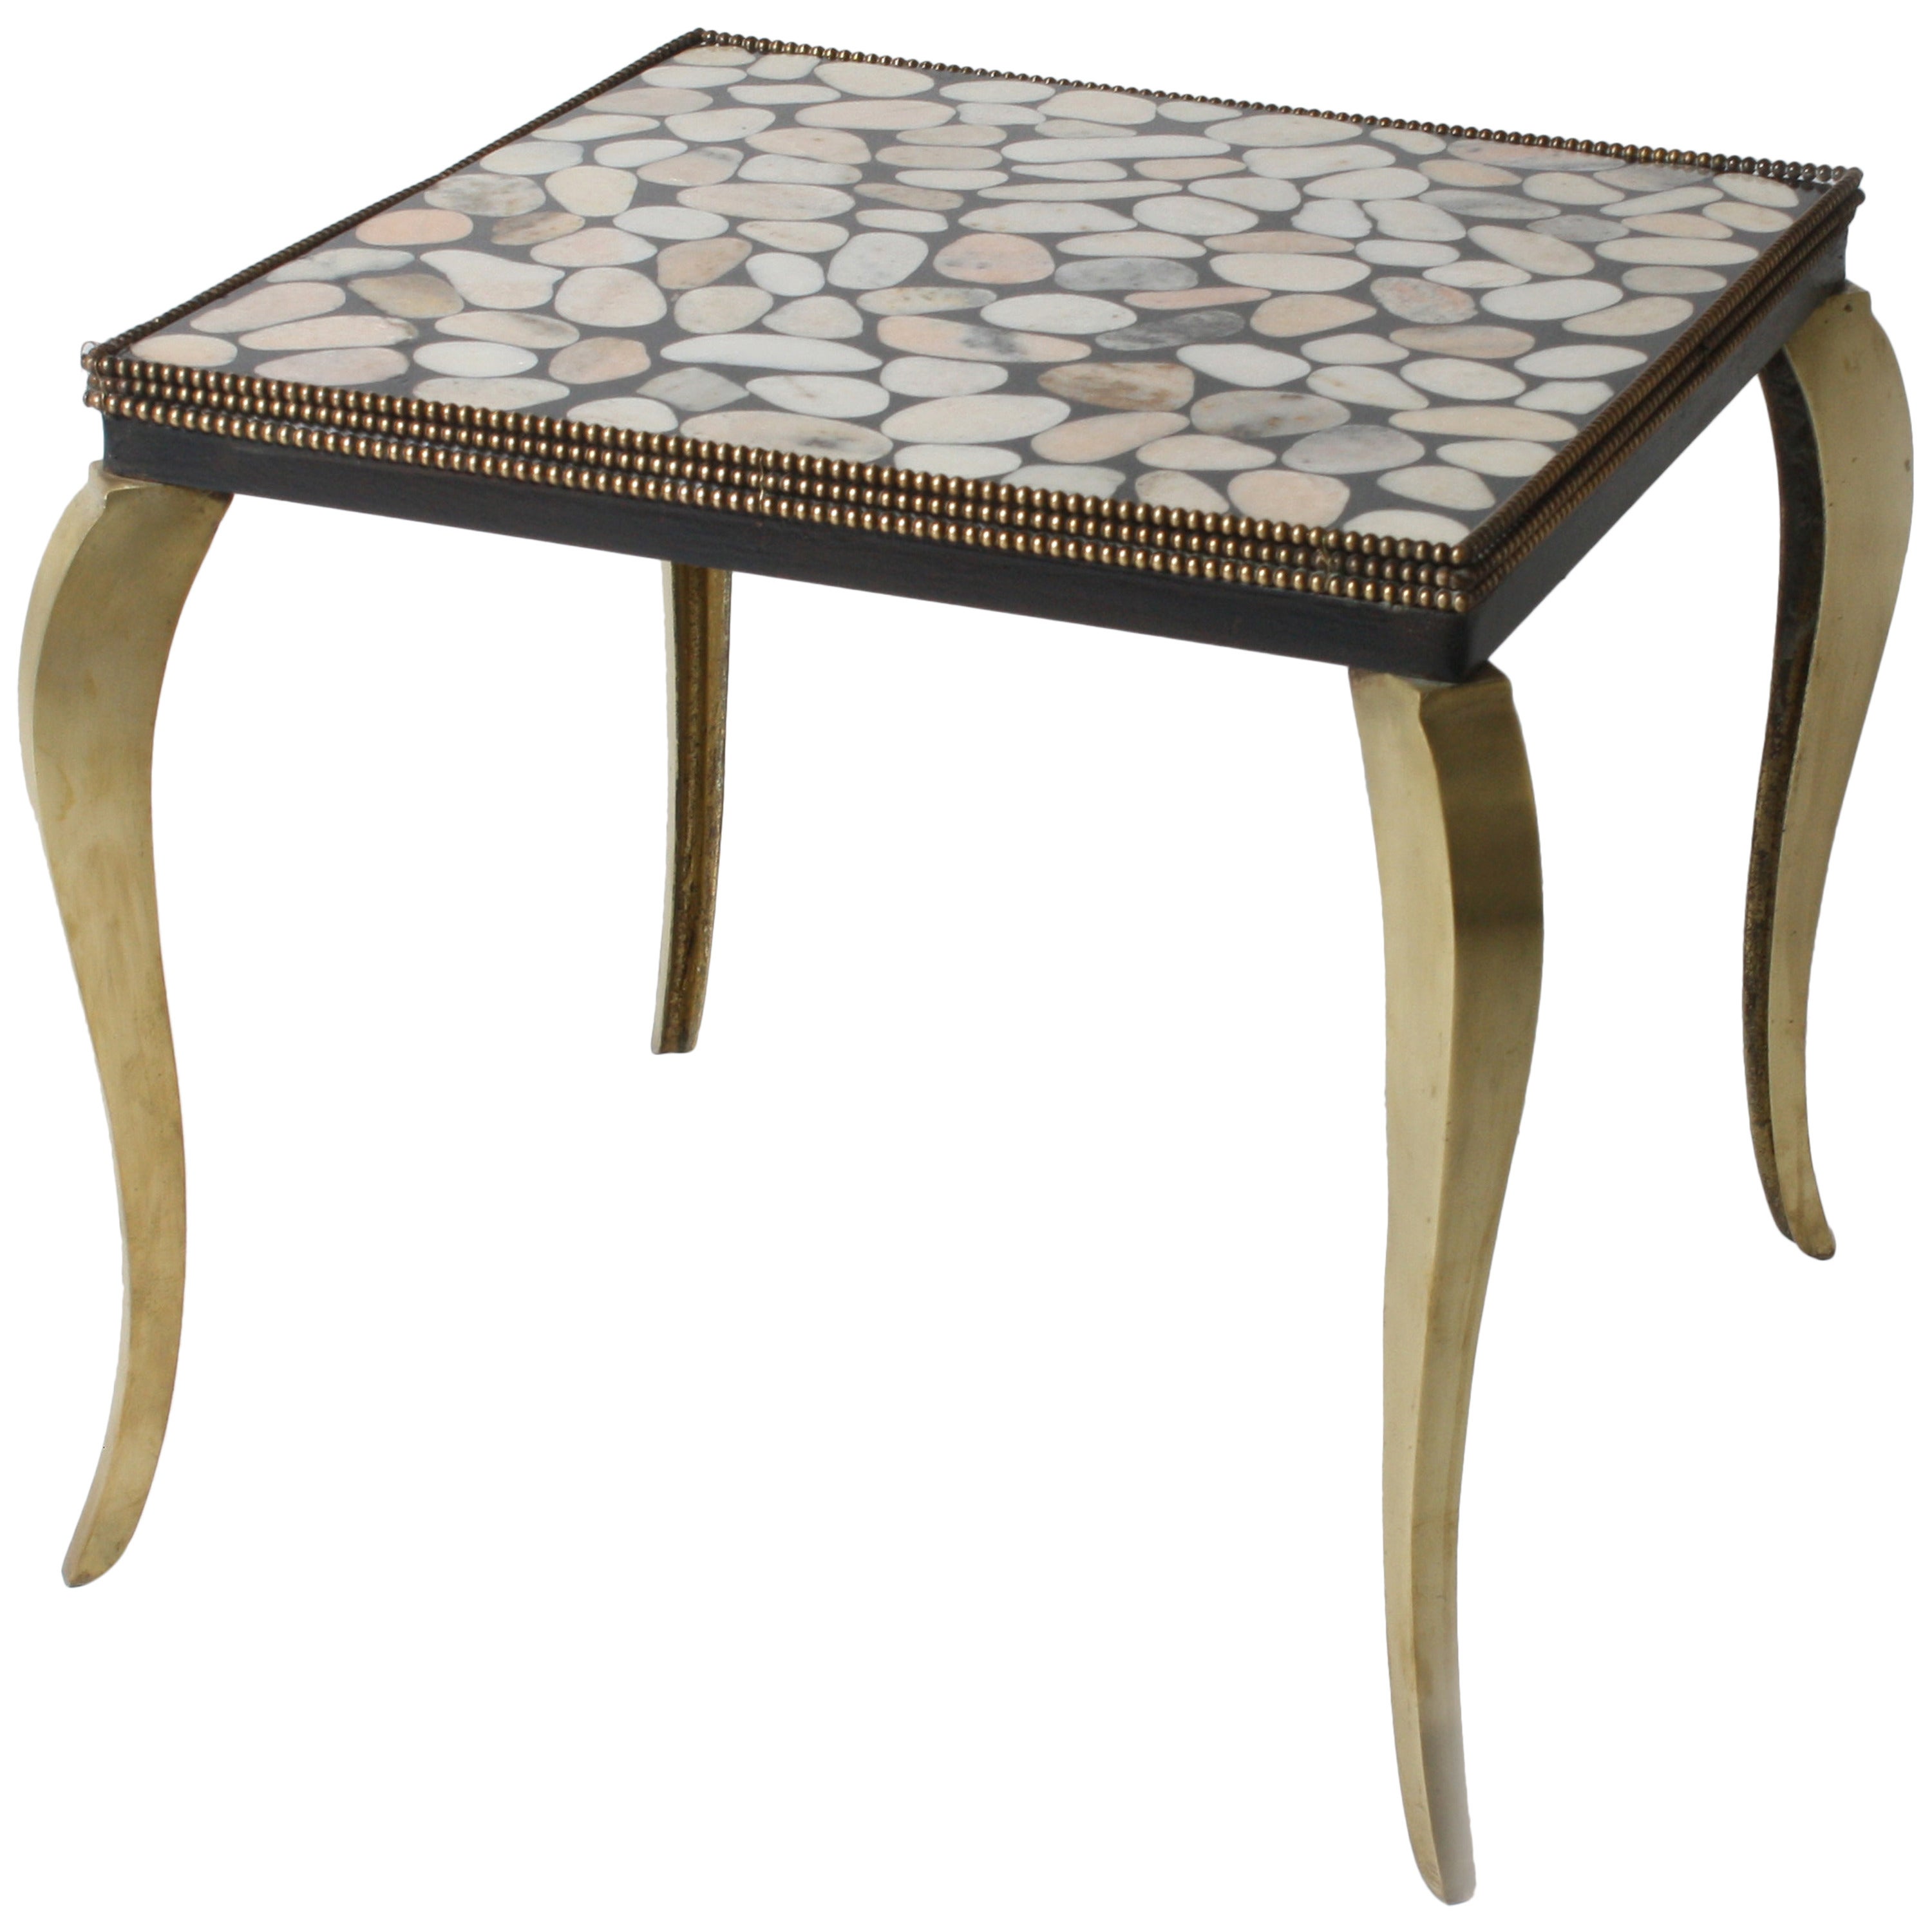 Side table with bronze base and inlaid pieced marble top, c. 1950